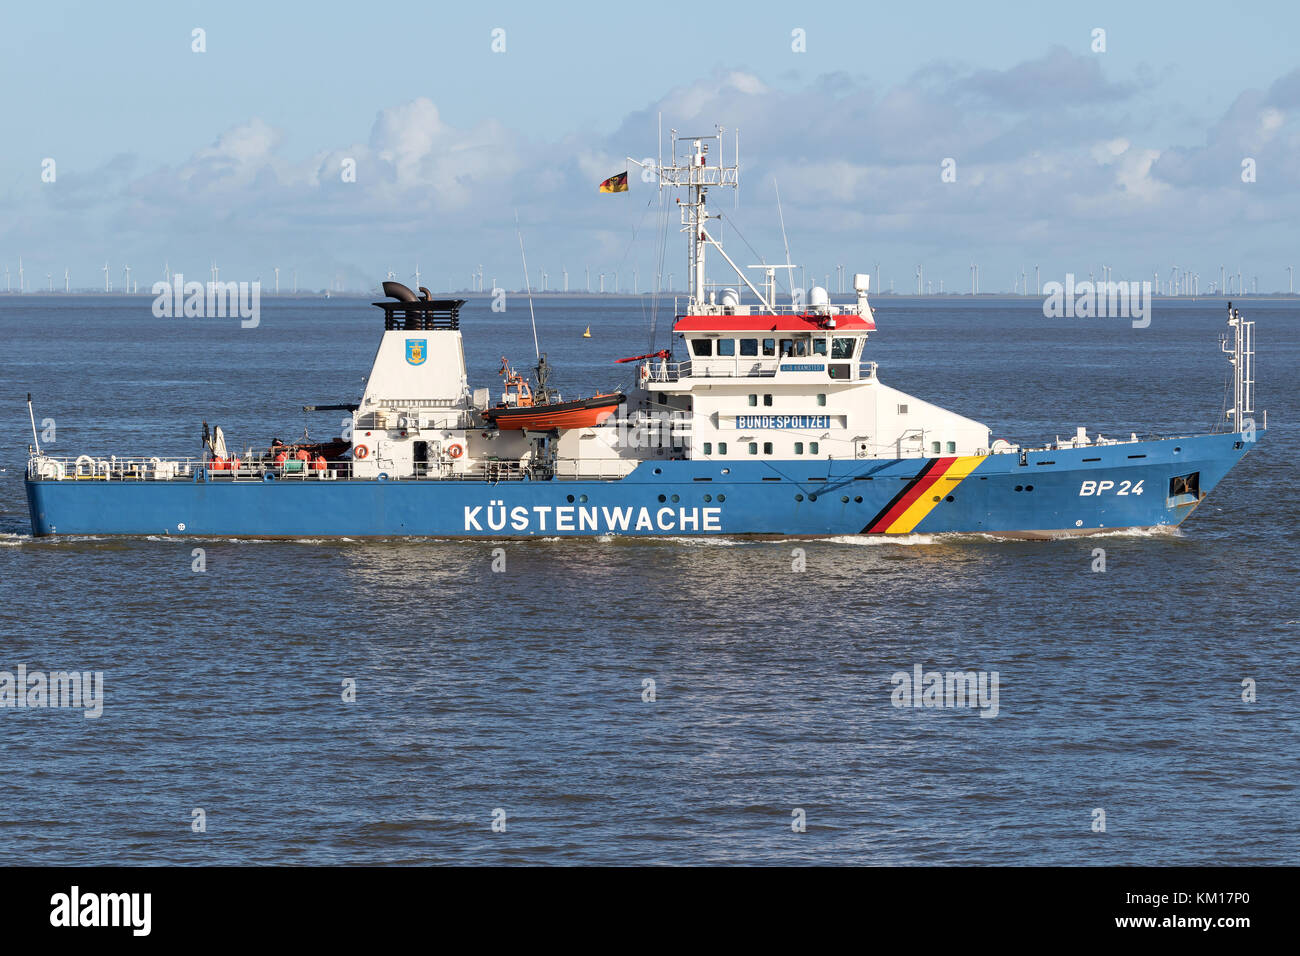 German Federal Police boat BP24 BAD BRAMSTEDT on the river Elbe. The Kustenwache is an association of several federal agencies. Stock Photo